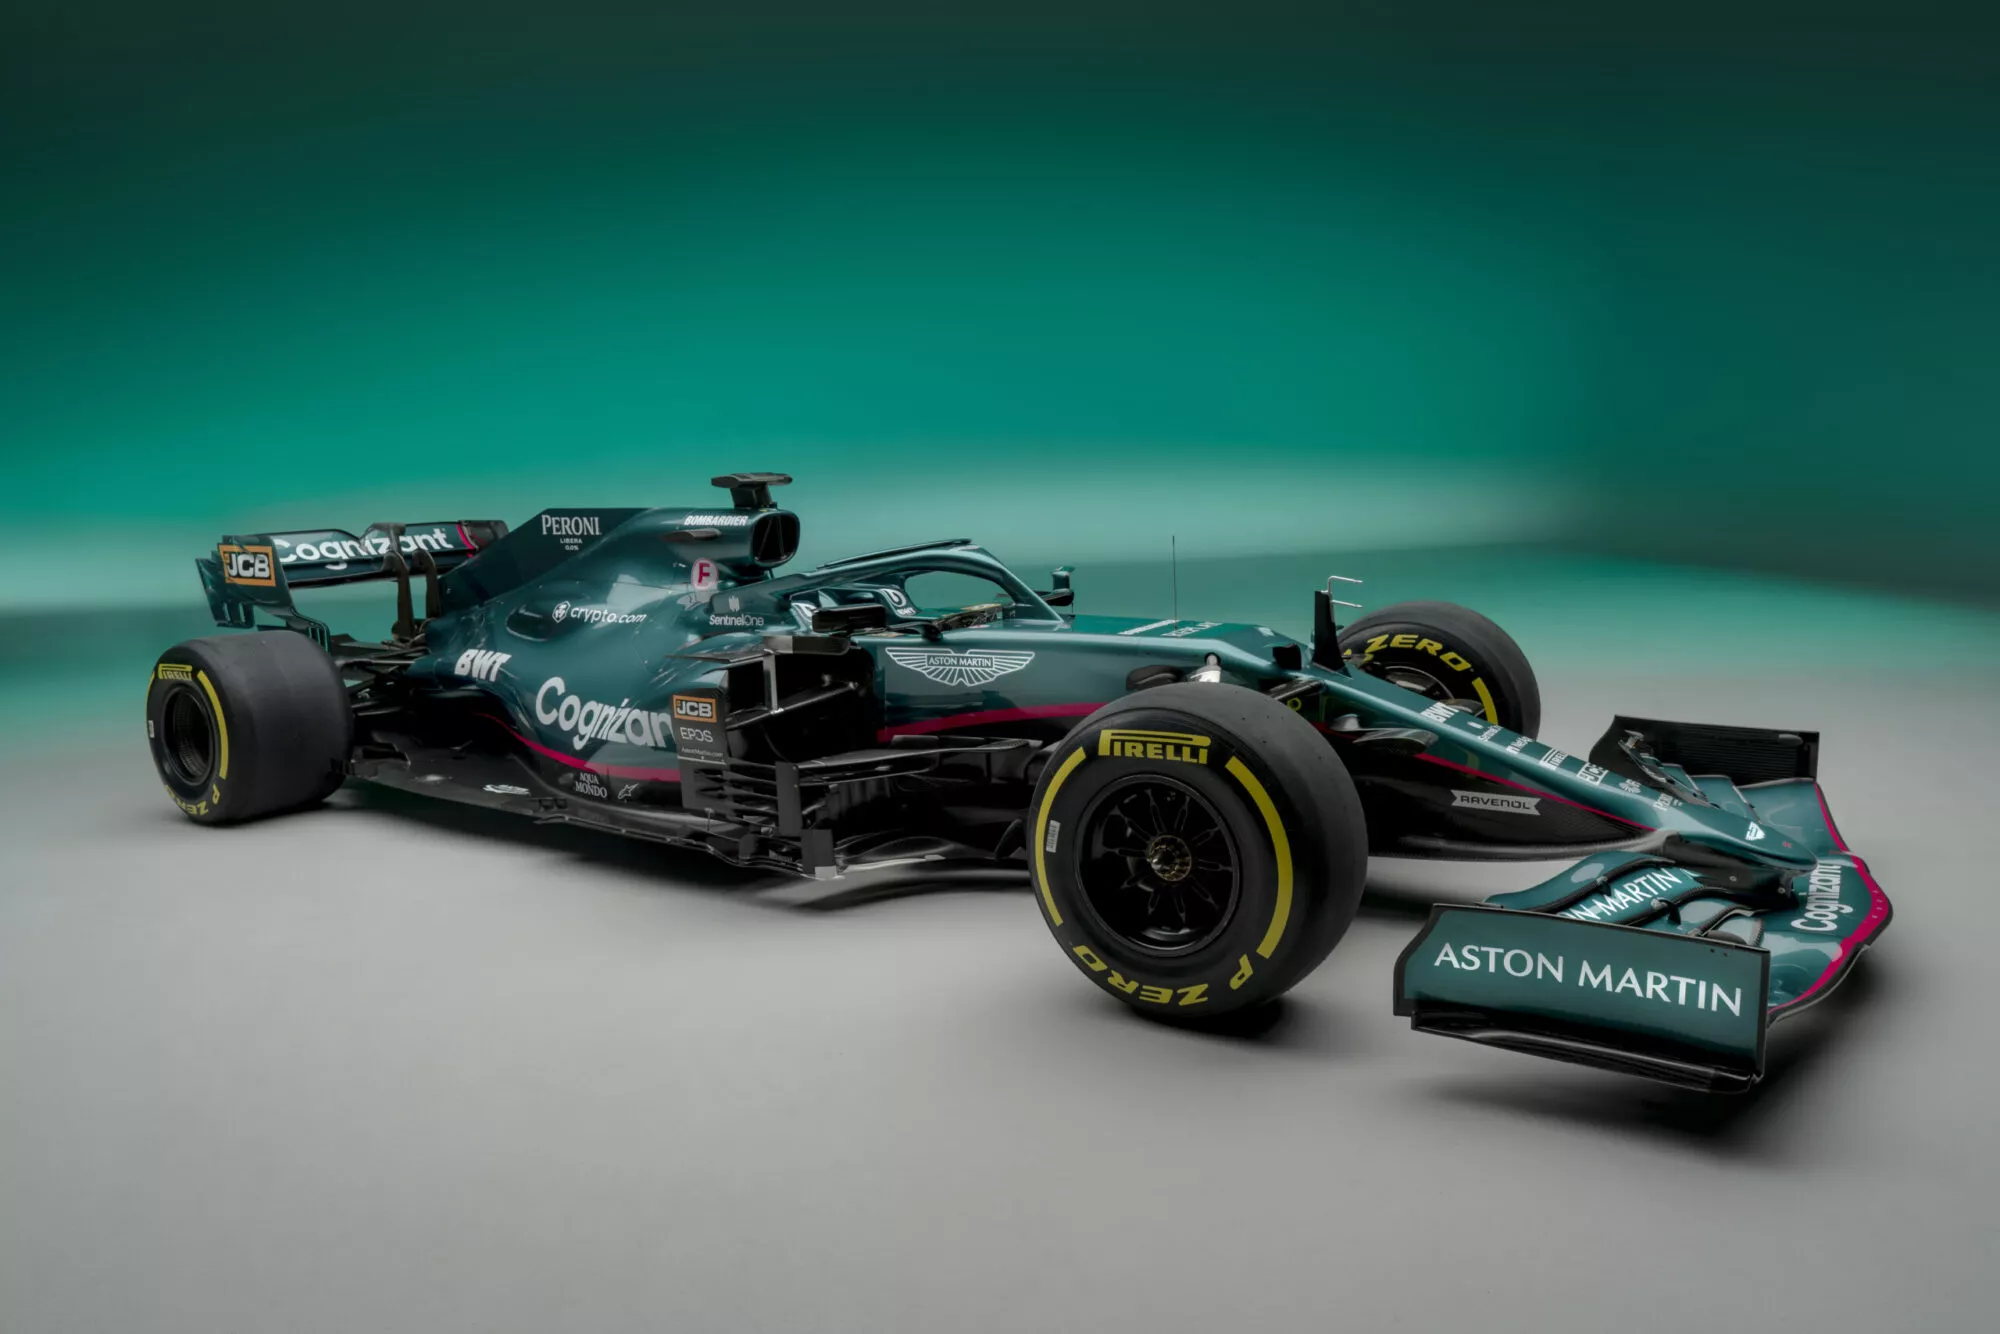 This car is why Aston Martin is in F1 